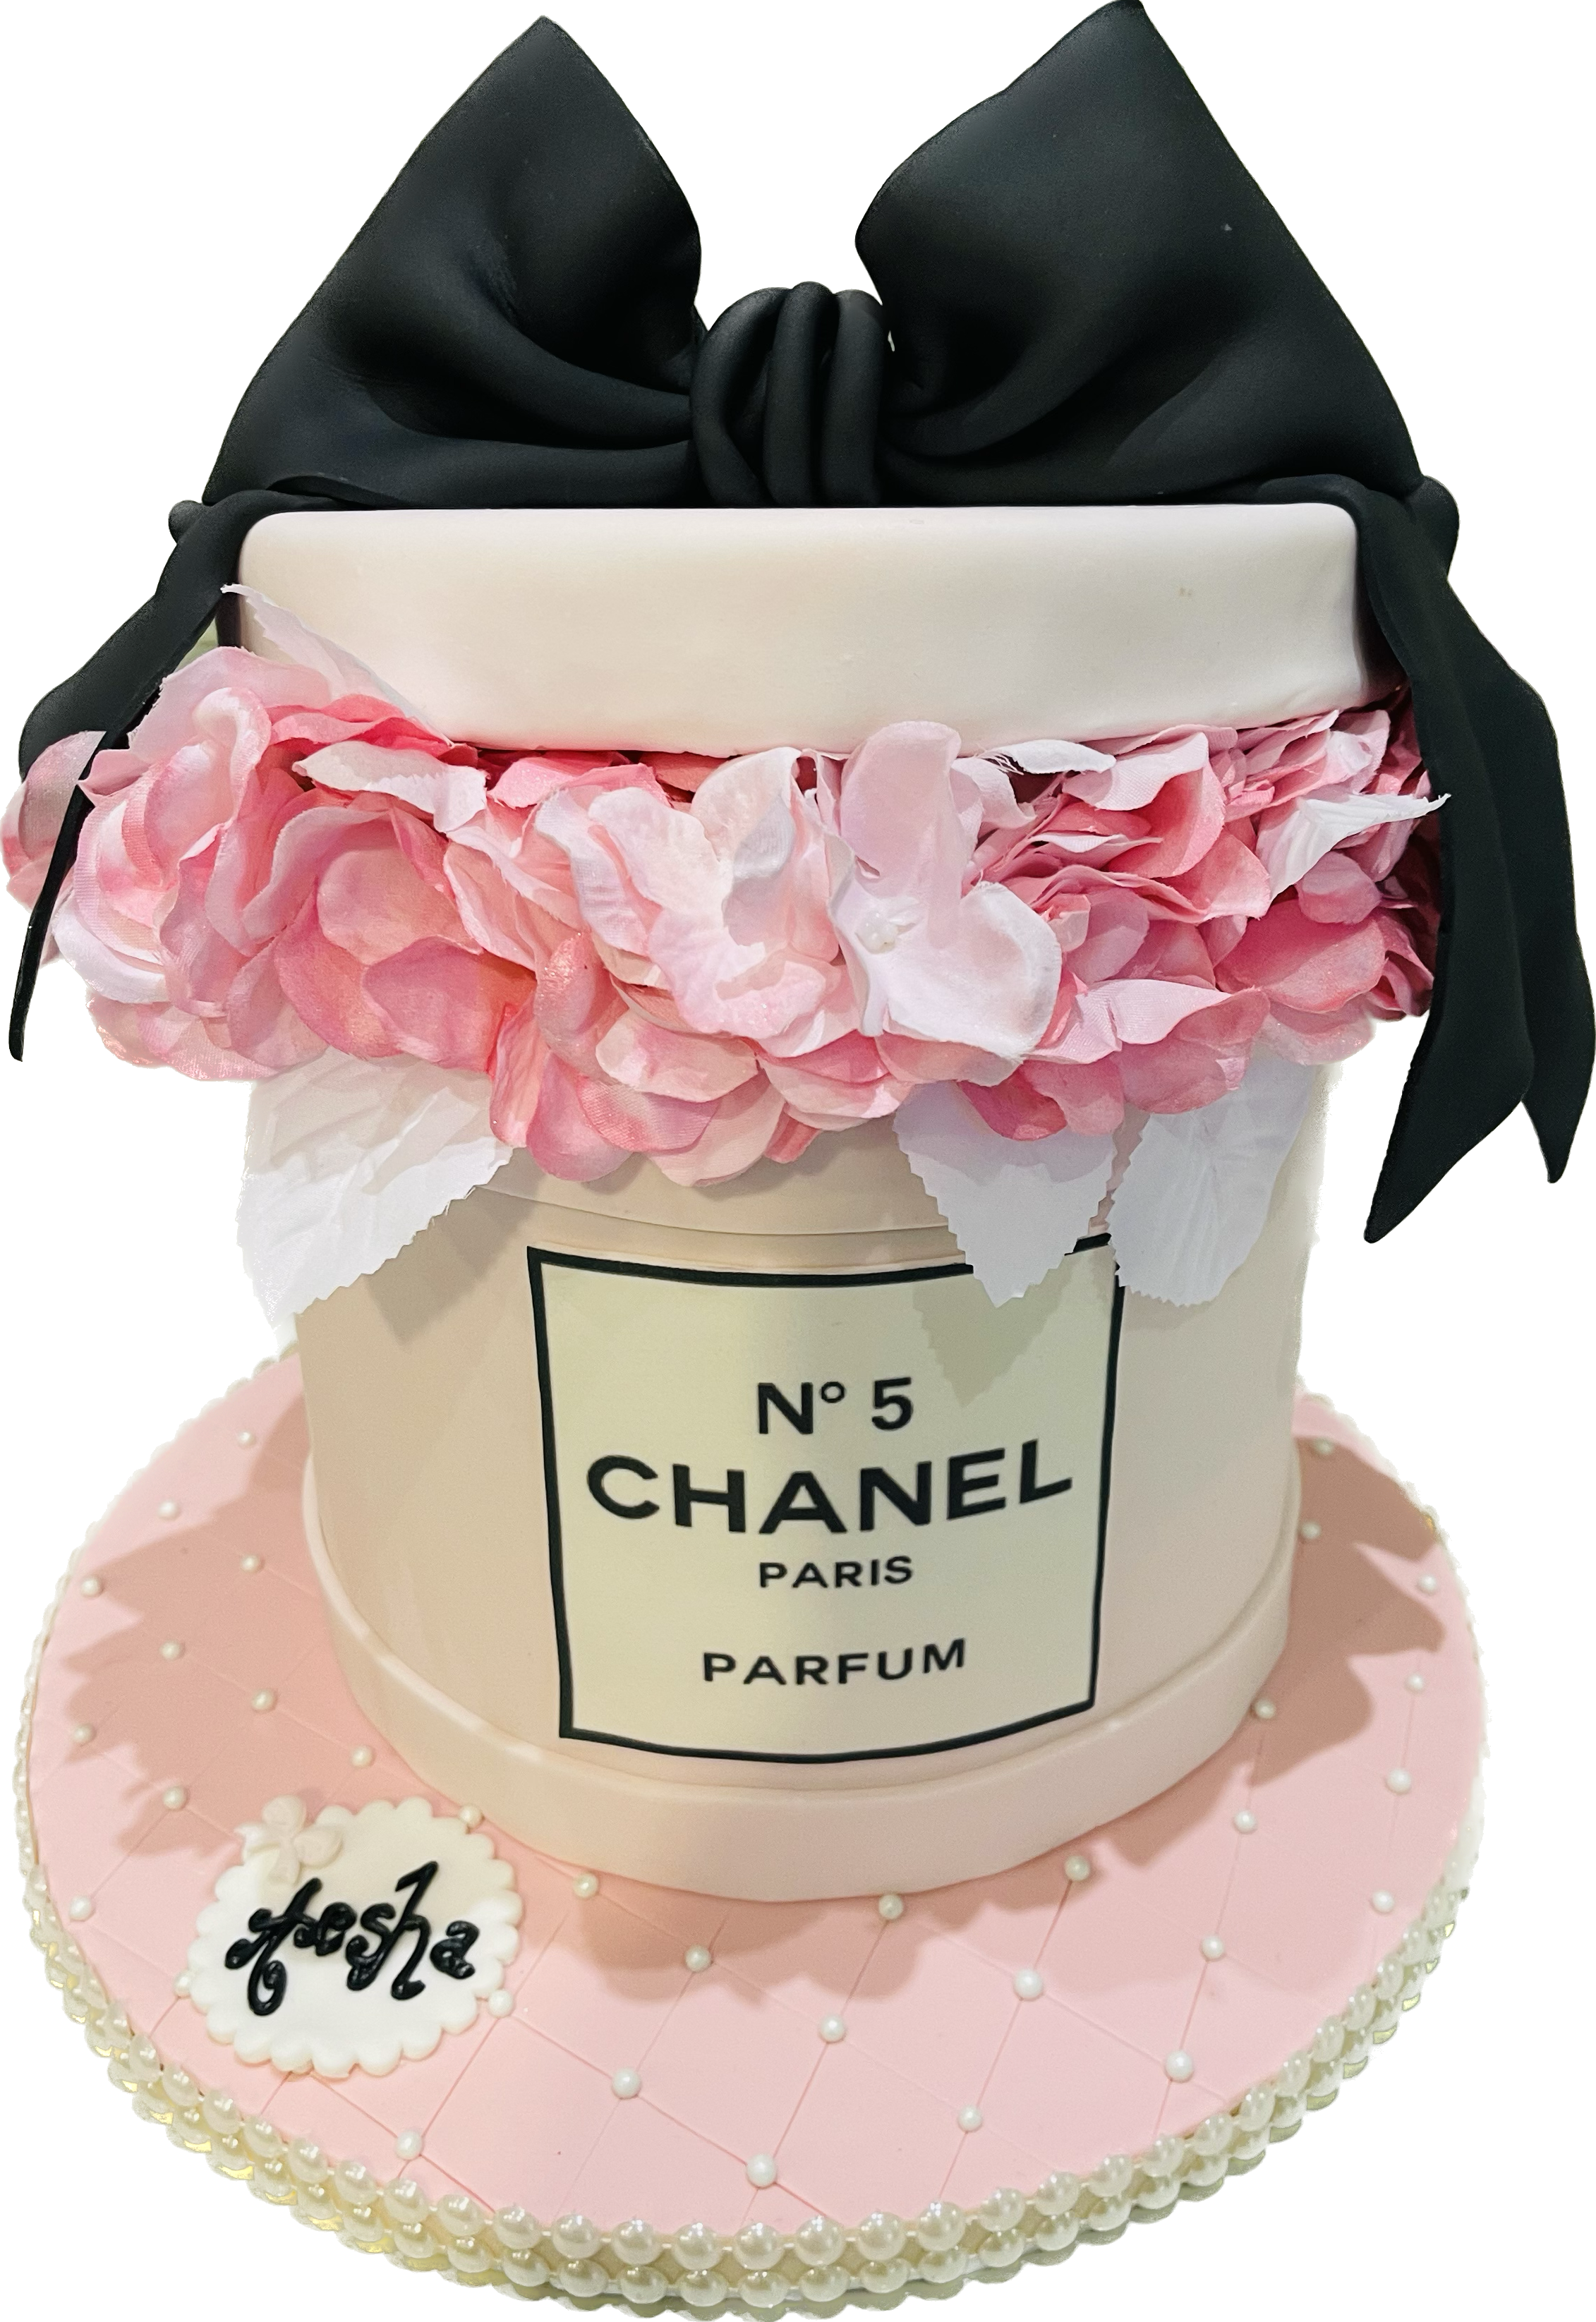 All Things Chanel Cake